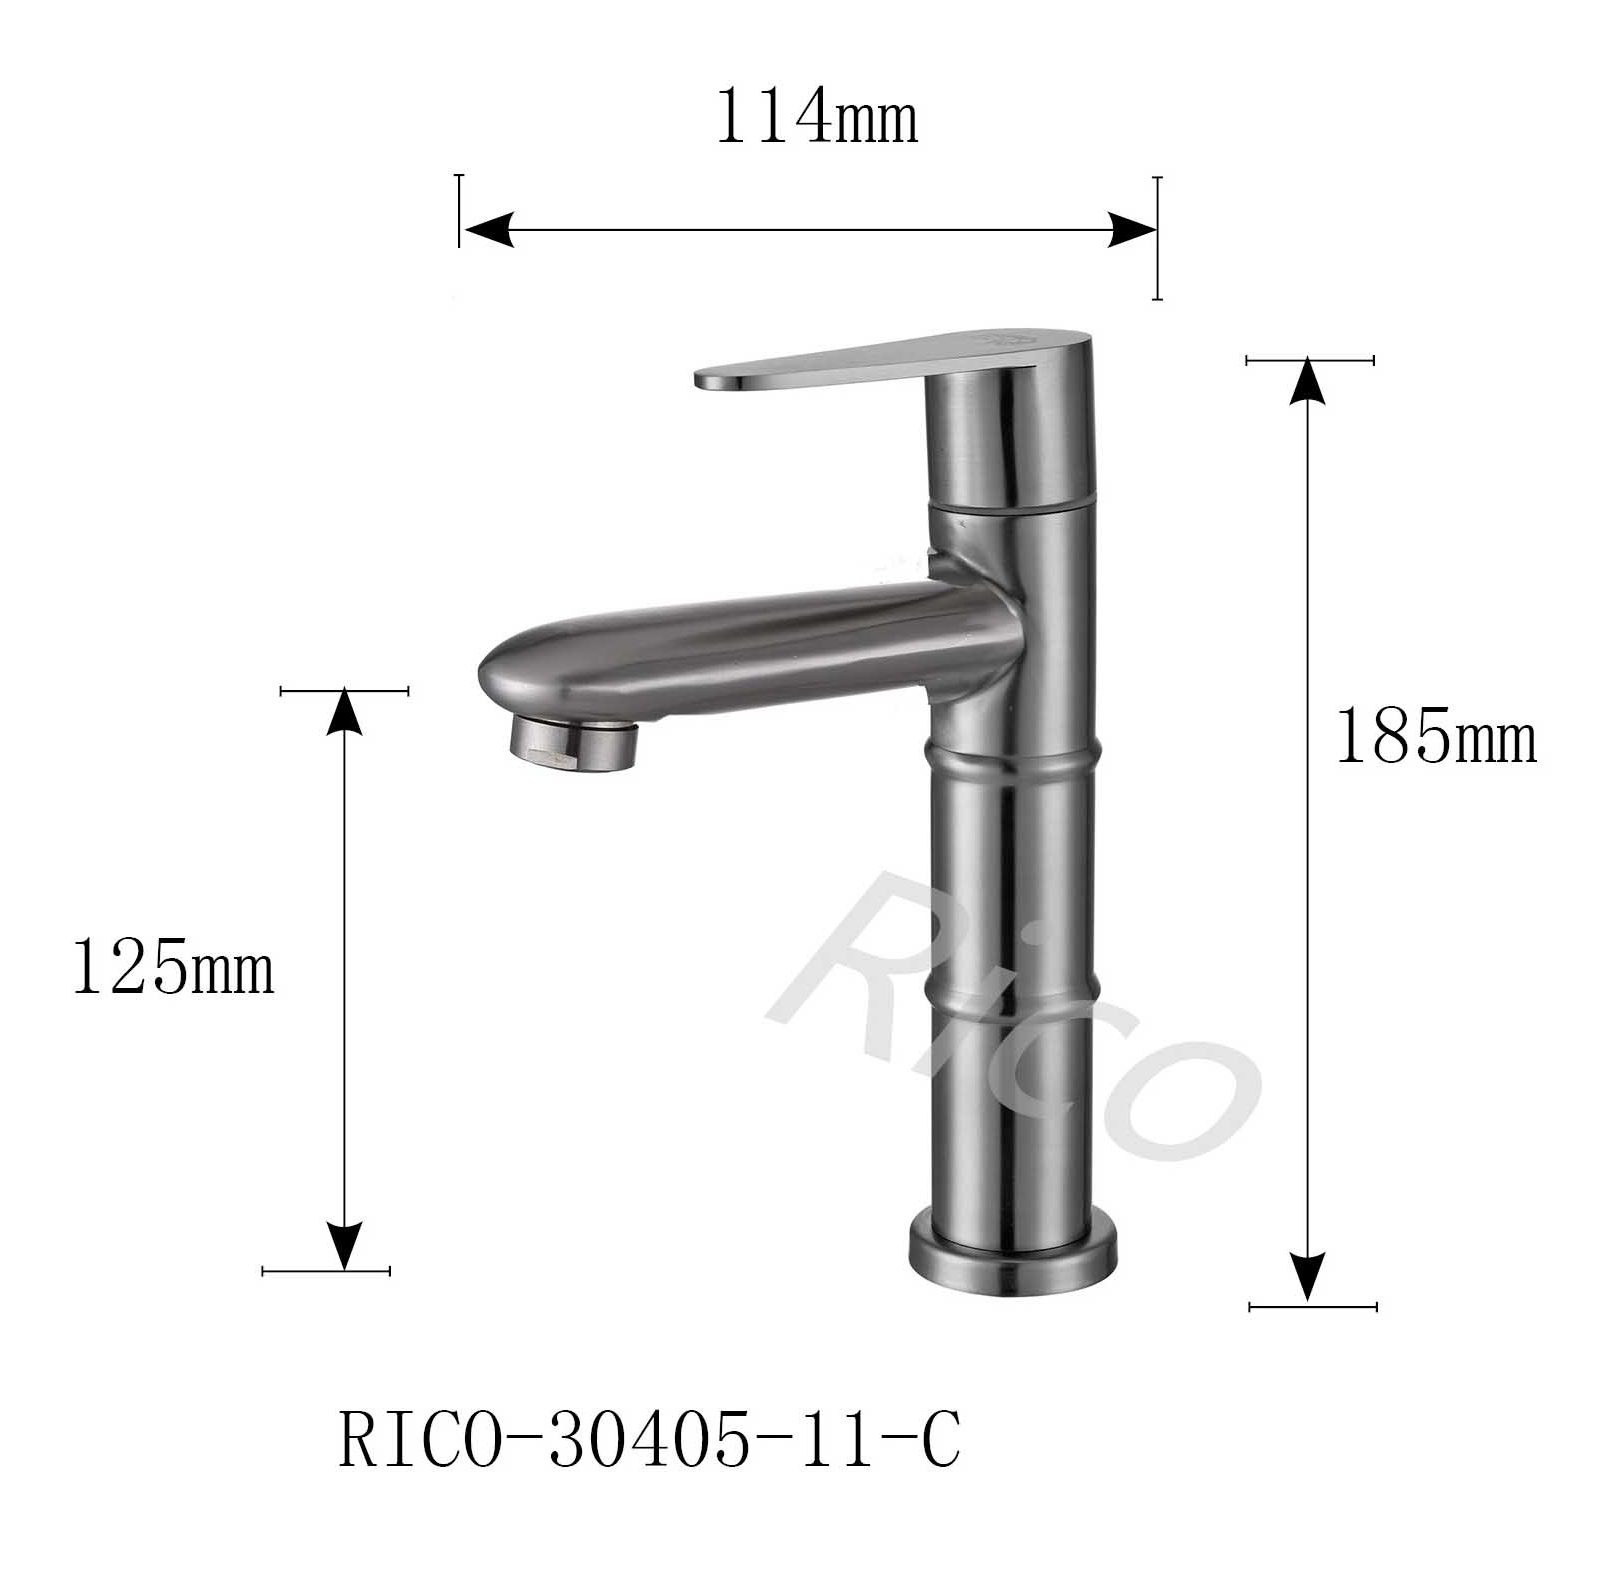 Rico : Stainless Steel Basin Cold Tap – RICO-30405-11-C